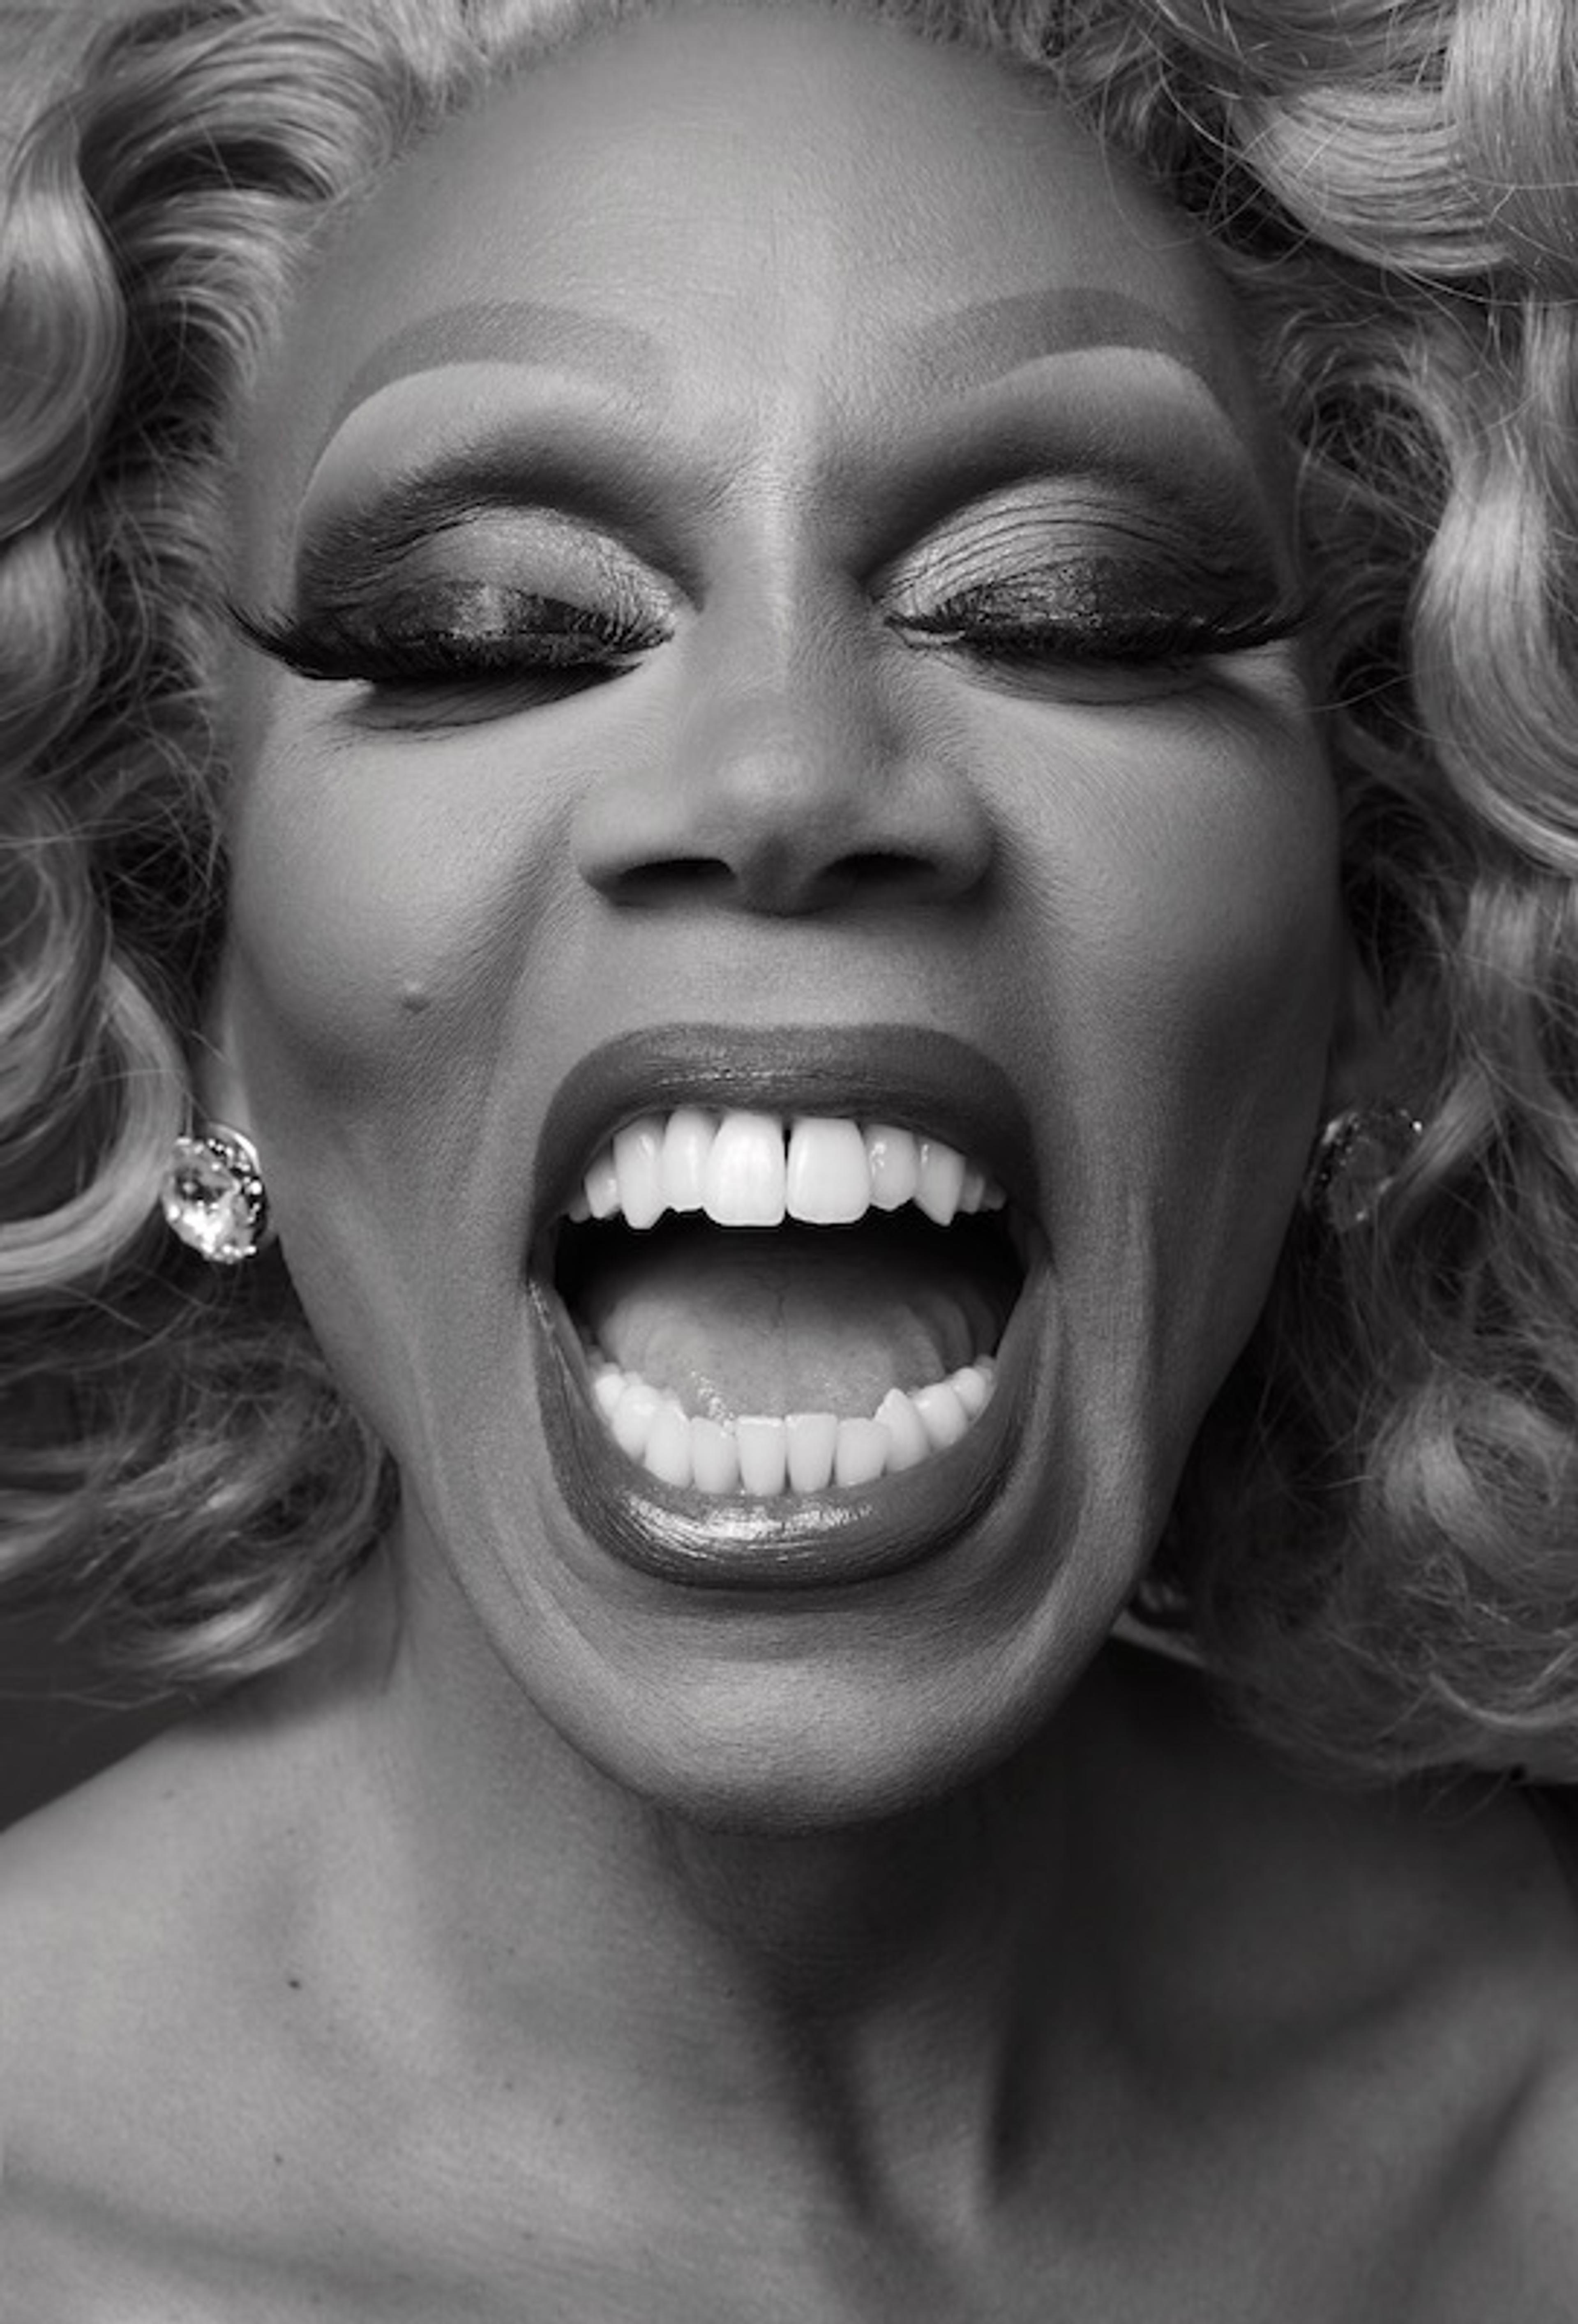 A black and white up-close portrait of Rupaul Andre Charles wearing makeup